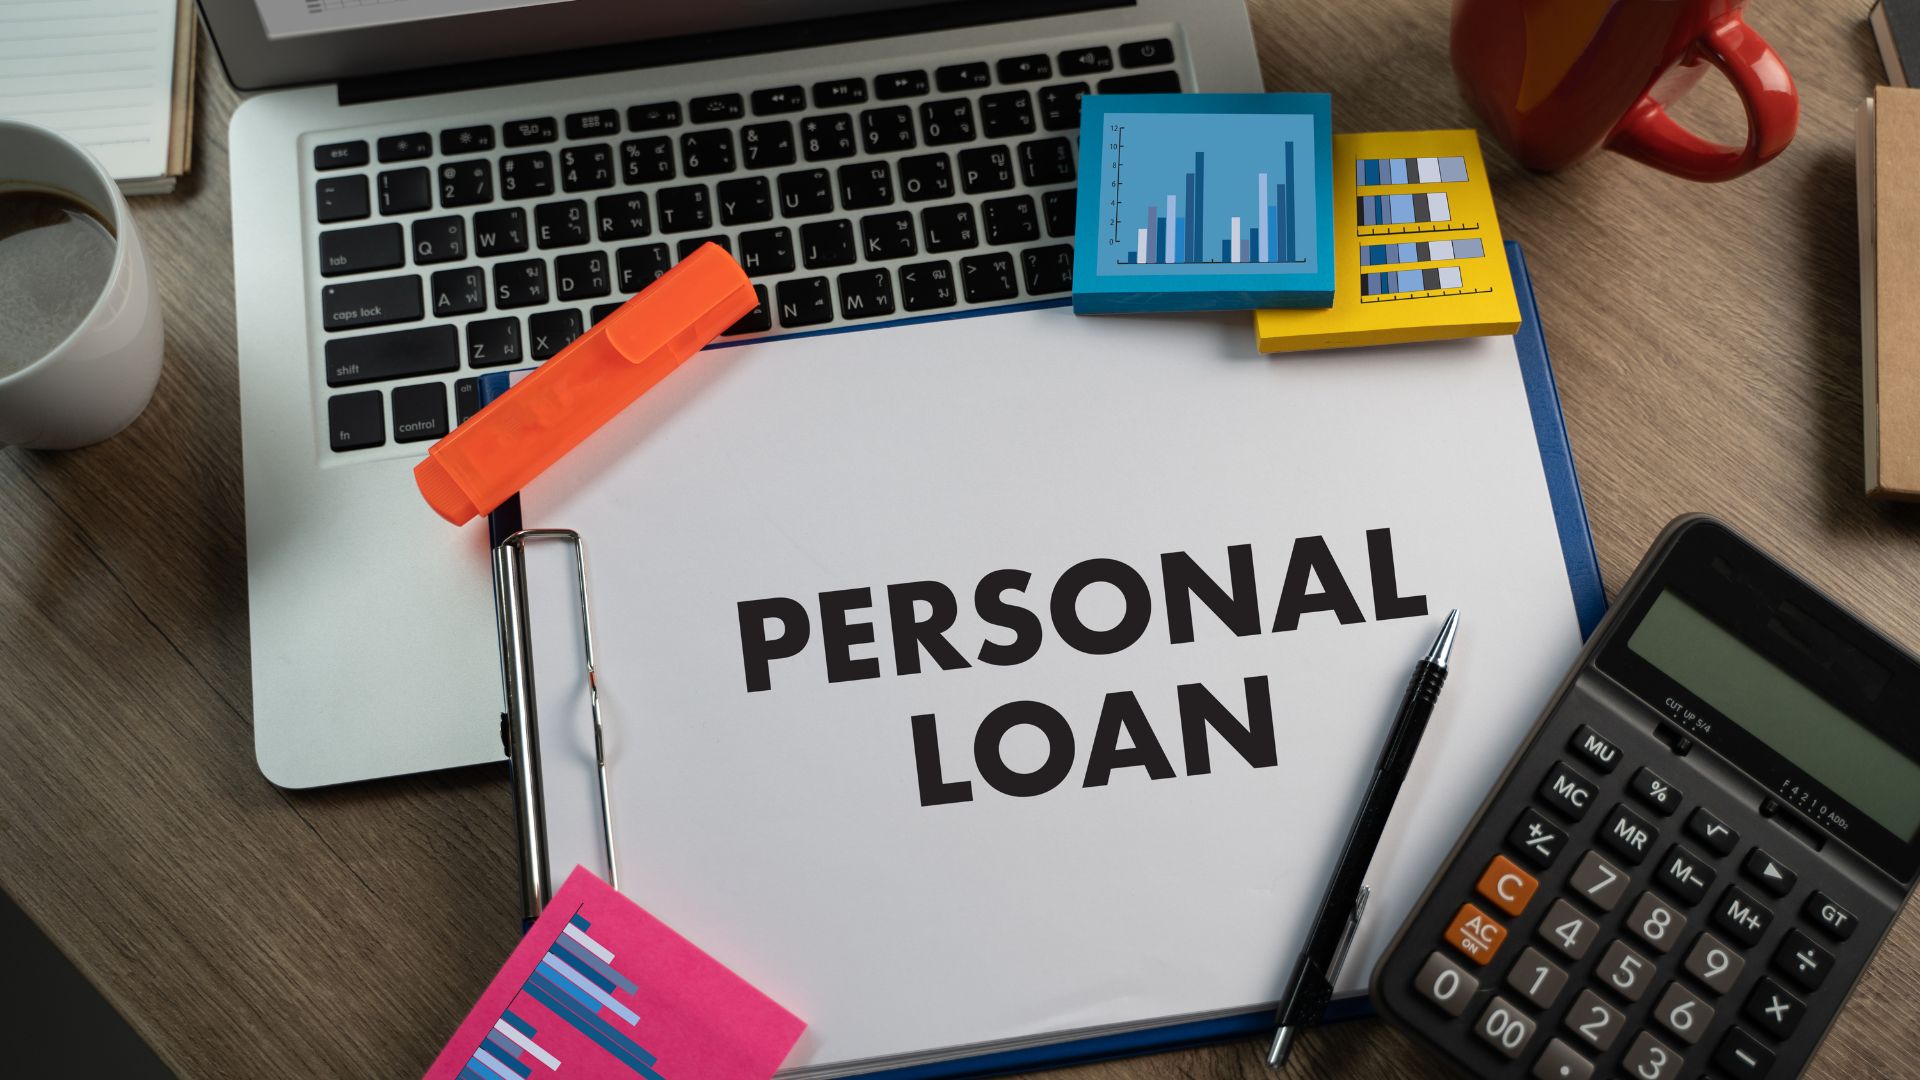 How to Get a Personal Loan with Bad Credit in 5 Steps